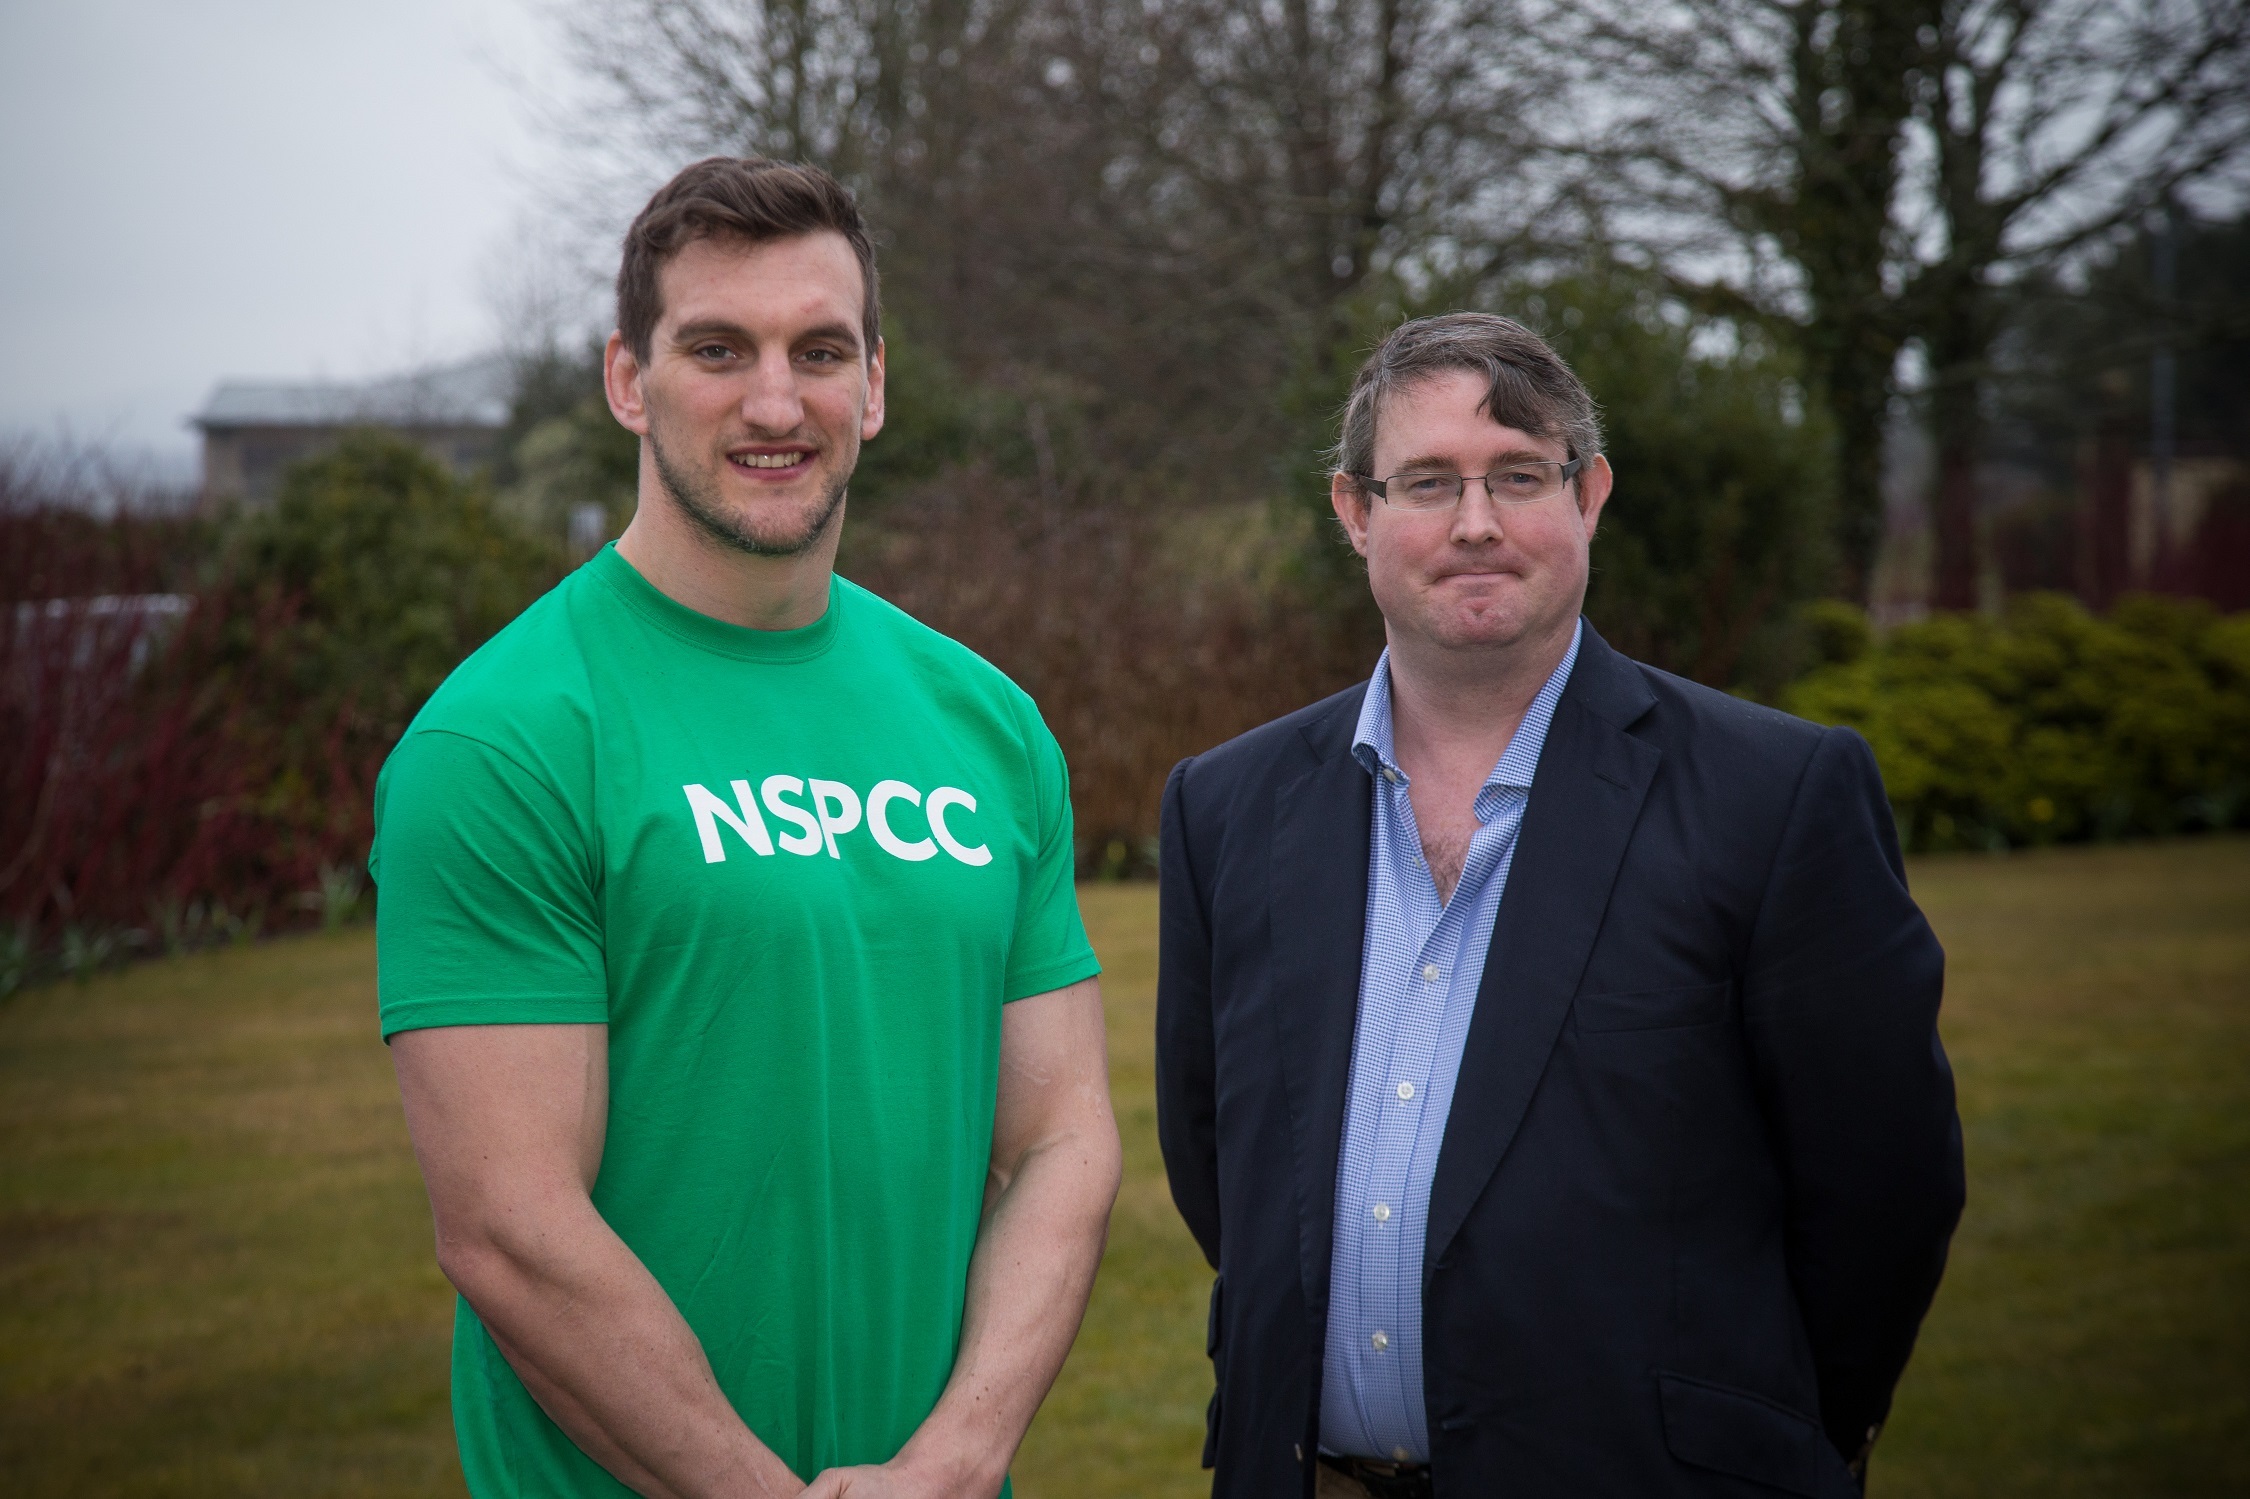 NSPCC ambassador for childhood Sam Warburton with Hywel Peterson, NSPCC divisional vice president for Wales. Picture: NSPCC